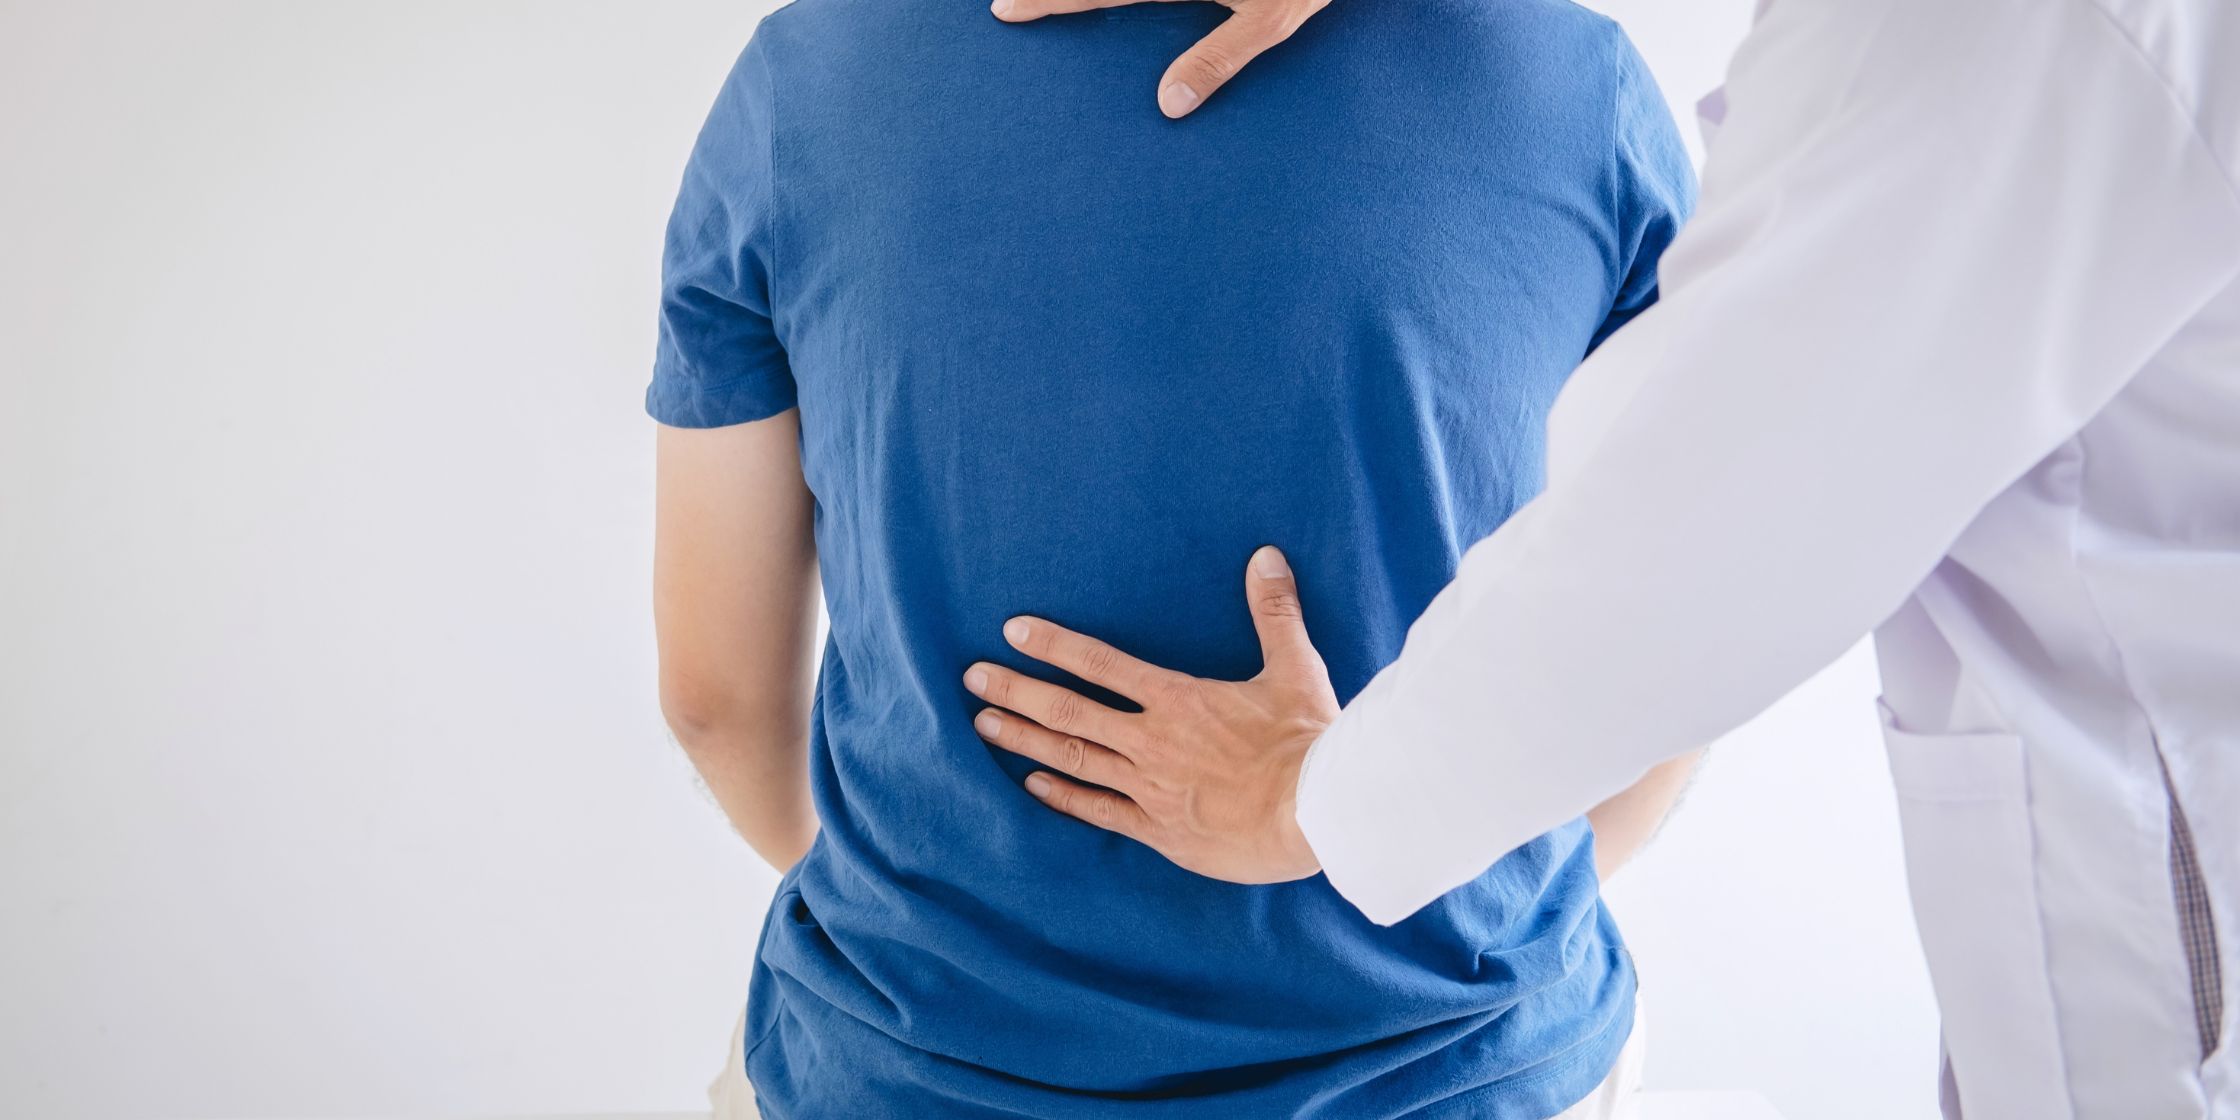 Lower Back Pain During Your Period: Causes, Diagnosis, and Treatment